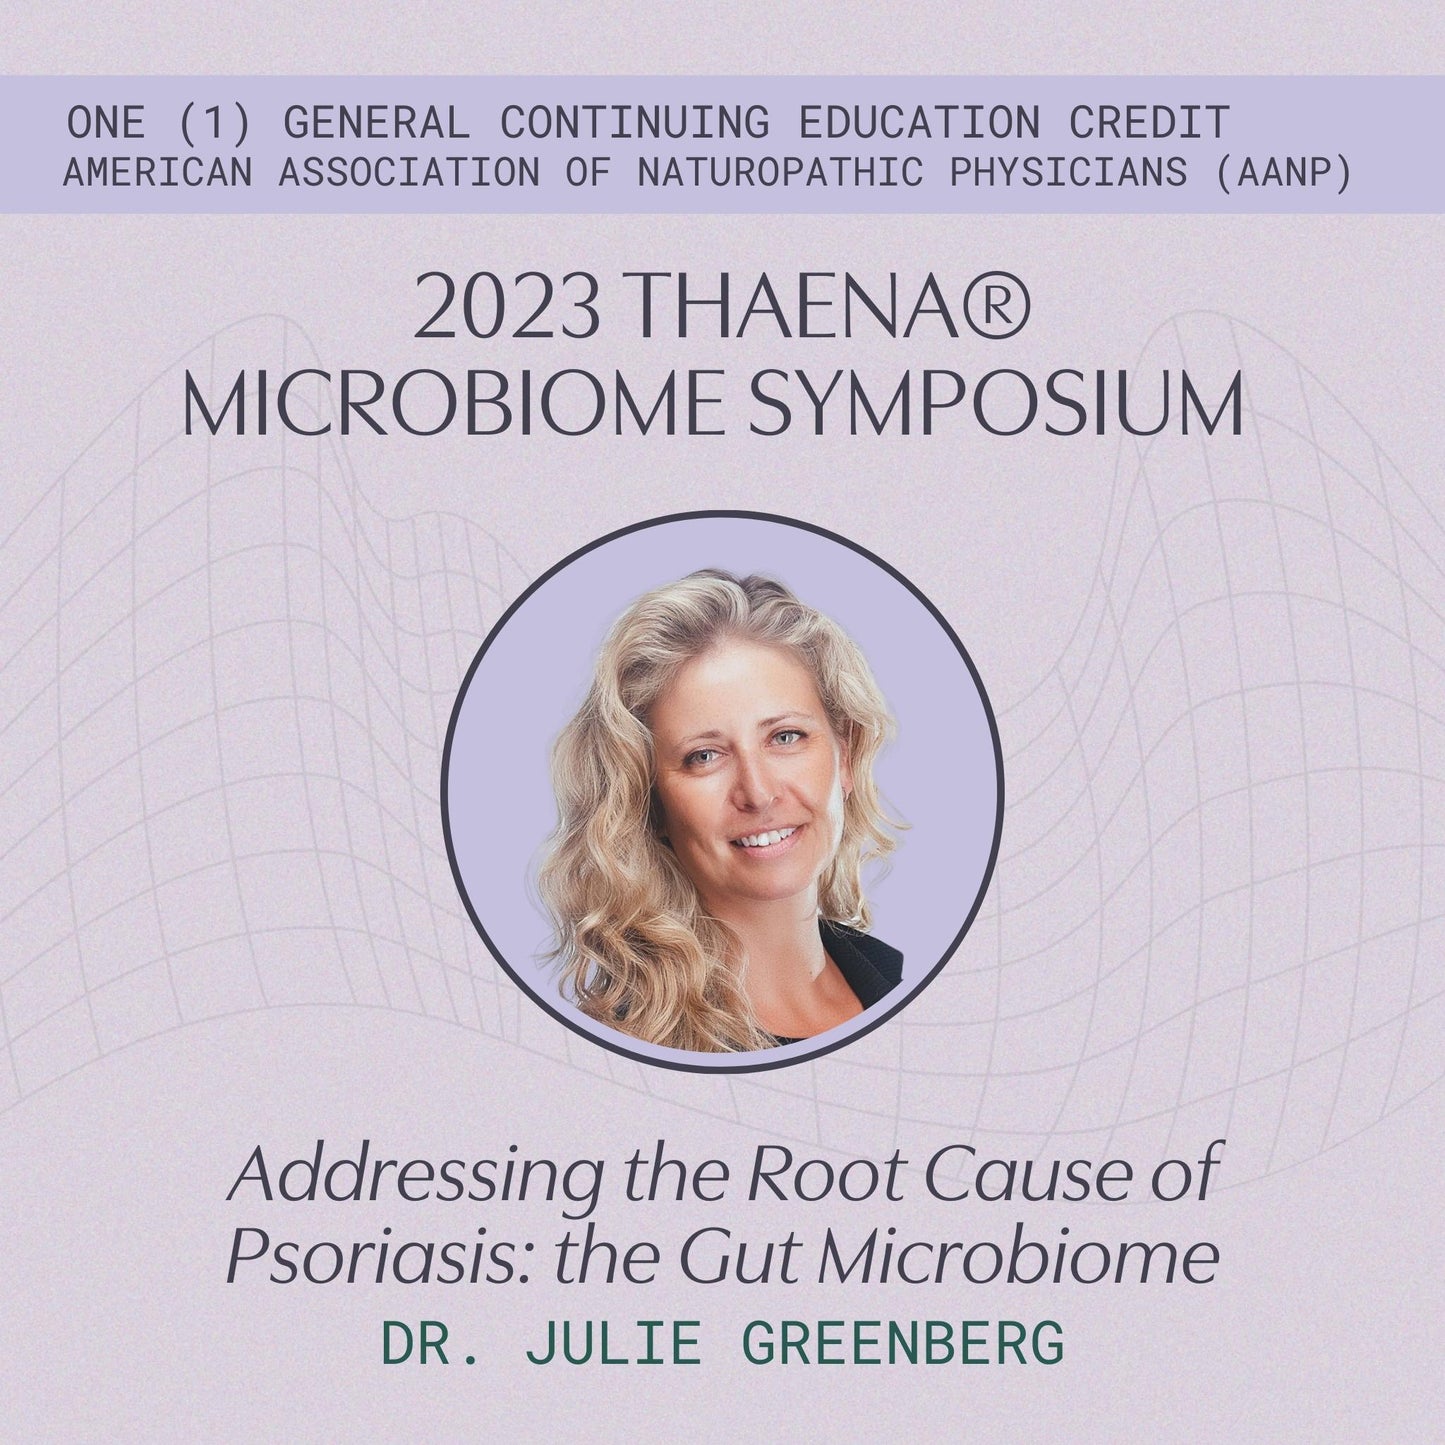 Julie Greenberg, ND, RH(AHG), MBA - Addressing the Root Cause of Psoriasis: the Gut Microbiome (1 General CE Credit)